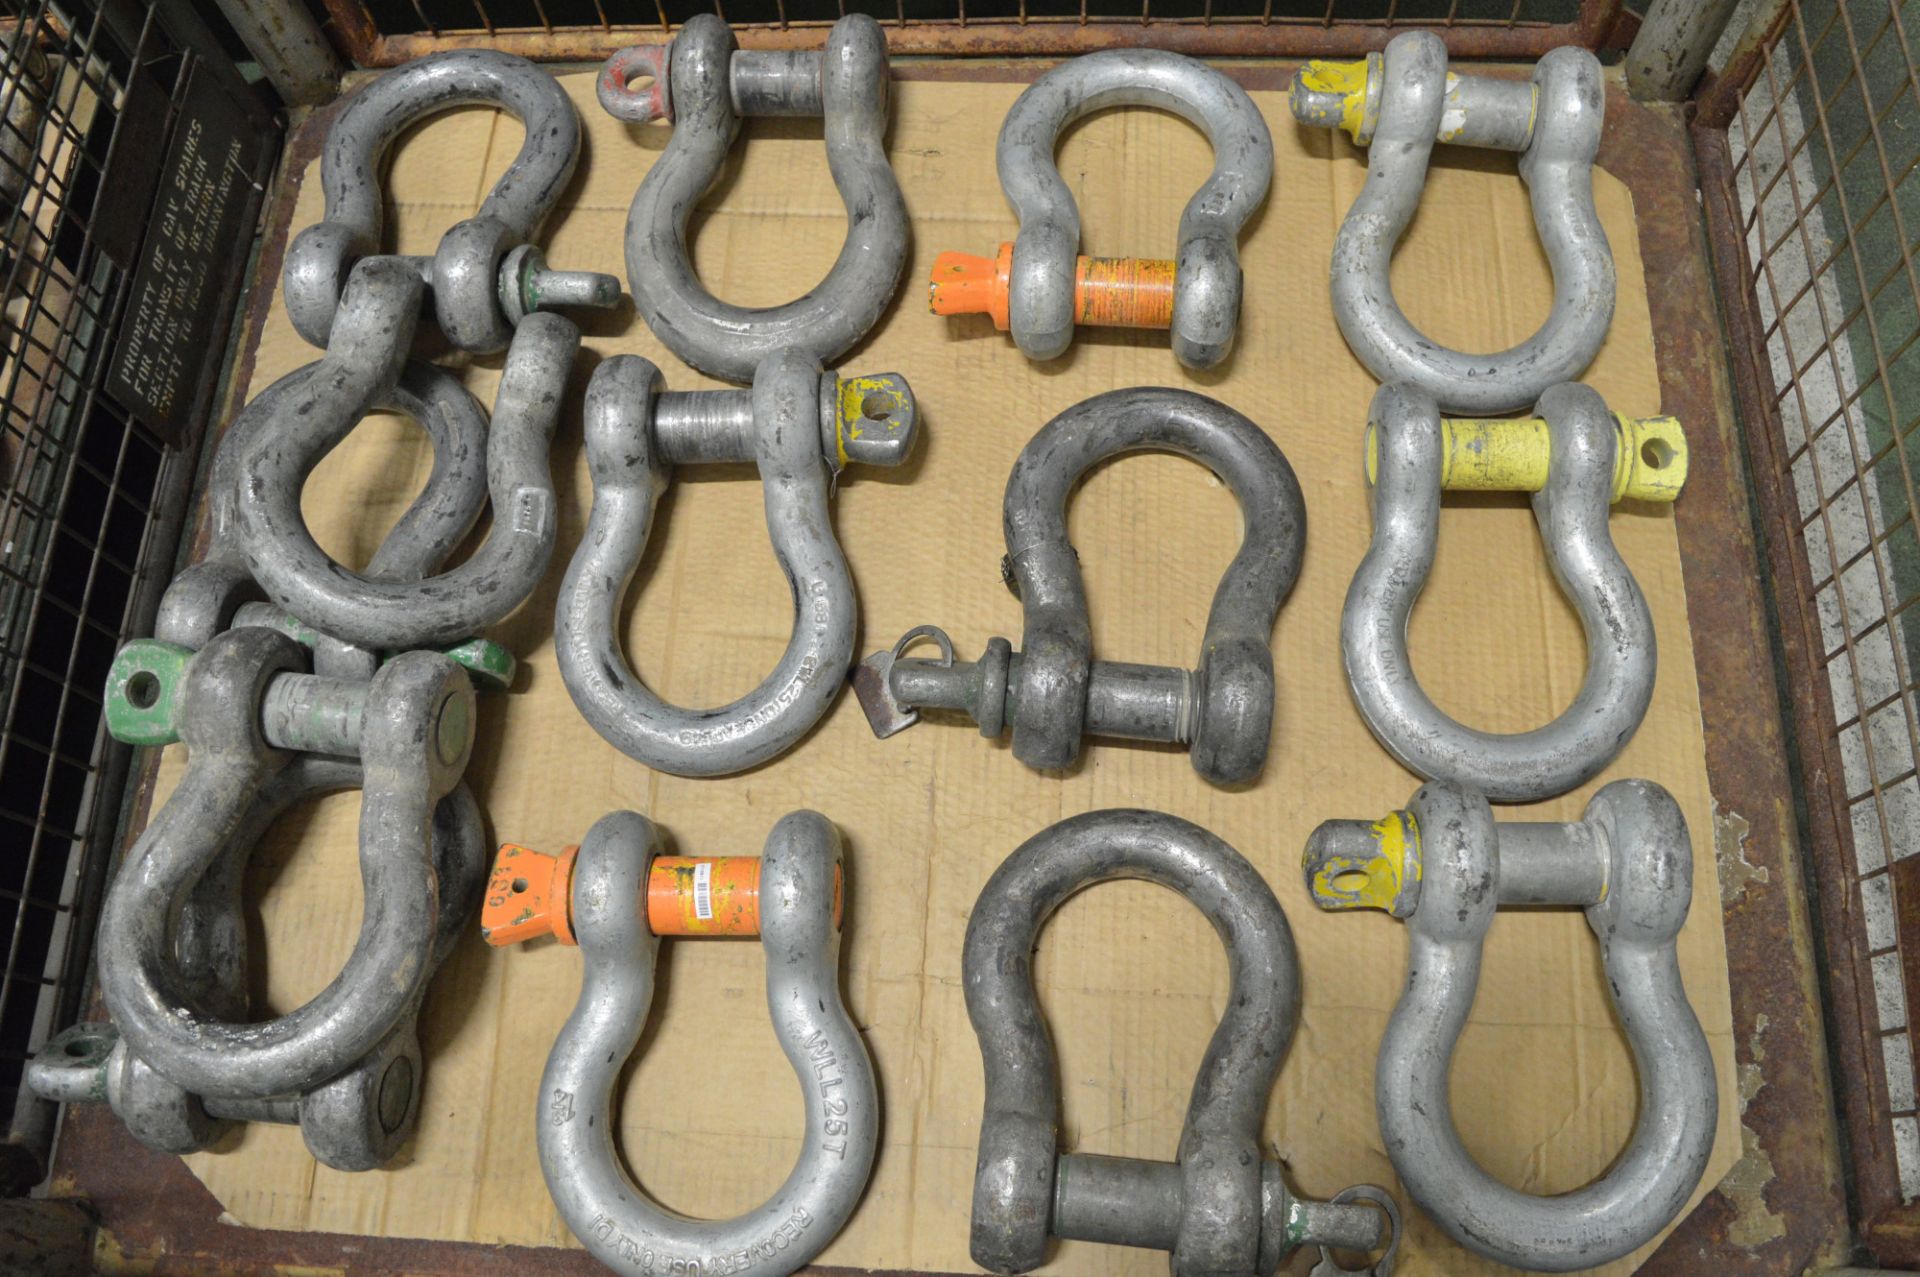 14x Assorted Shackles. - Image 2 of 2